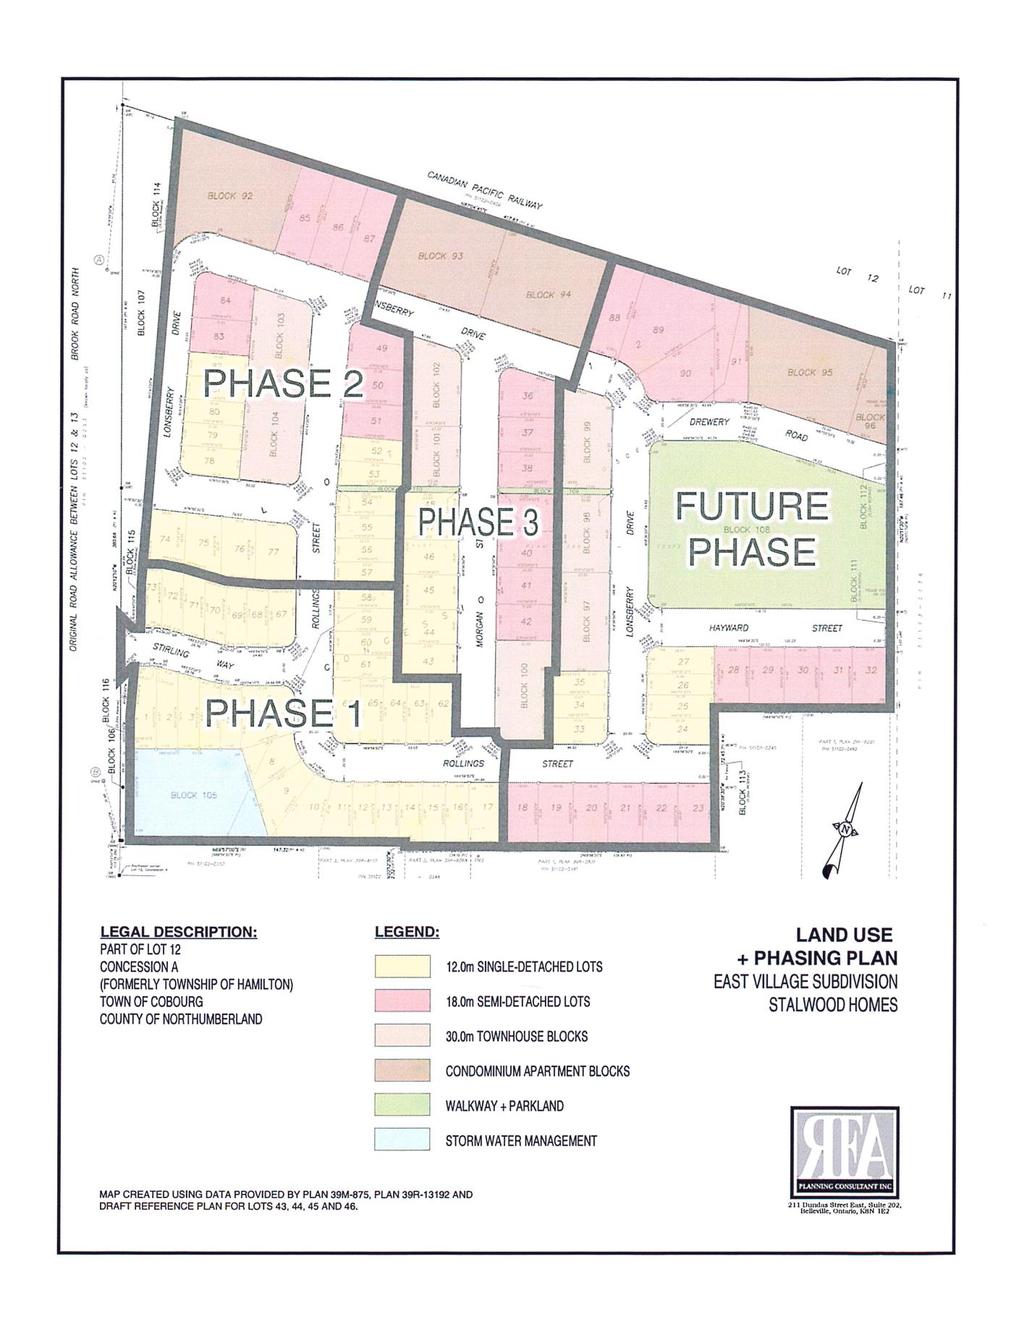 Schedule B East Village Subdivision Land Use and